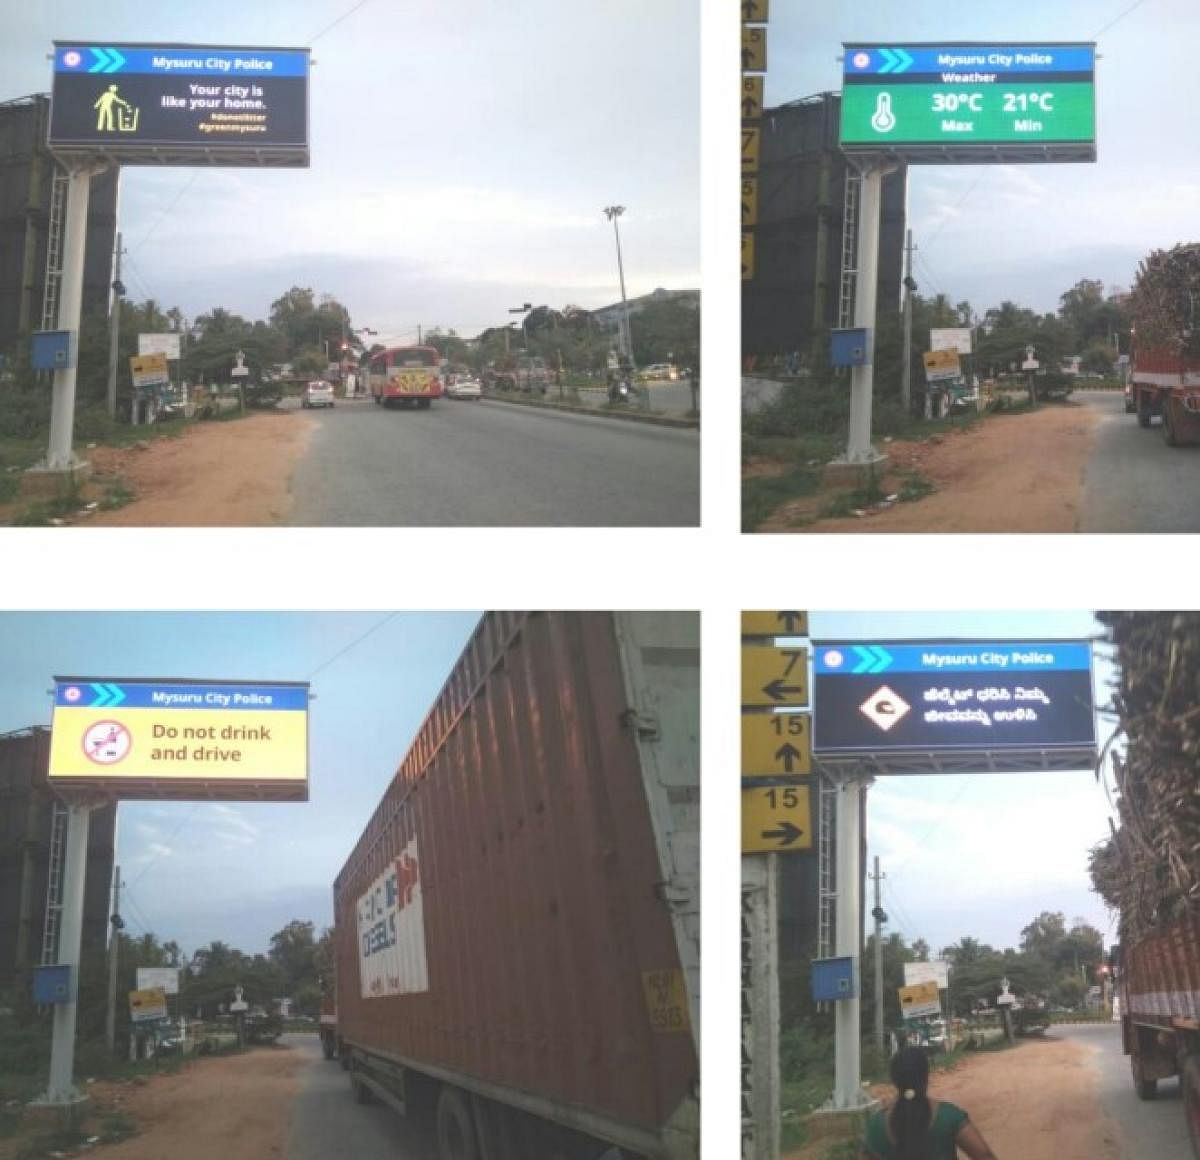 Smart Variable Messaging Systems to help city traffic